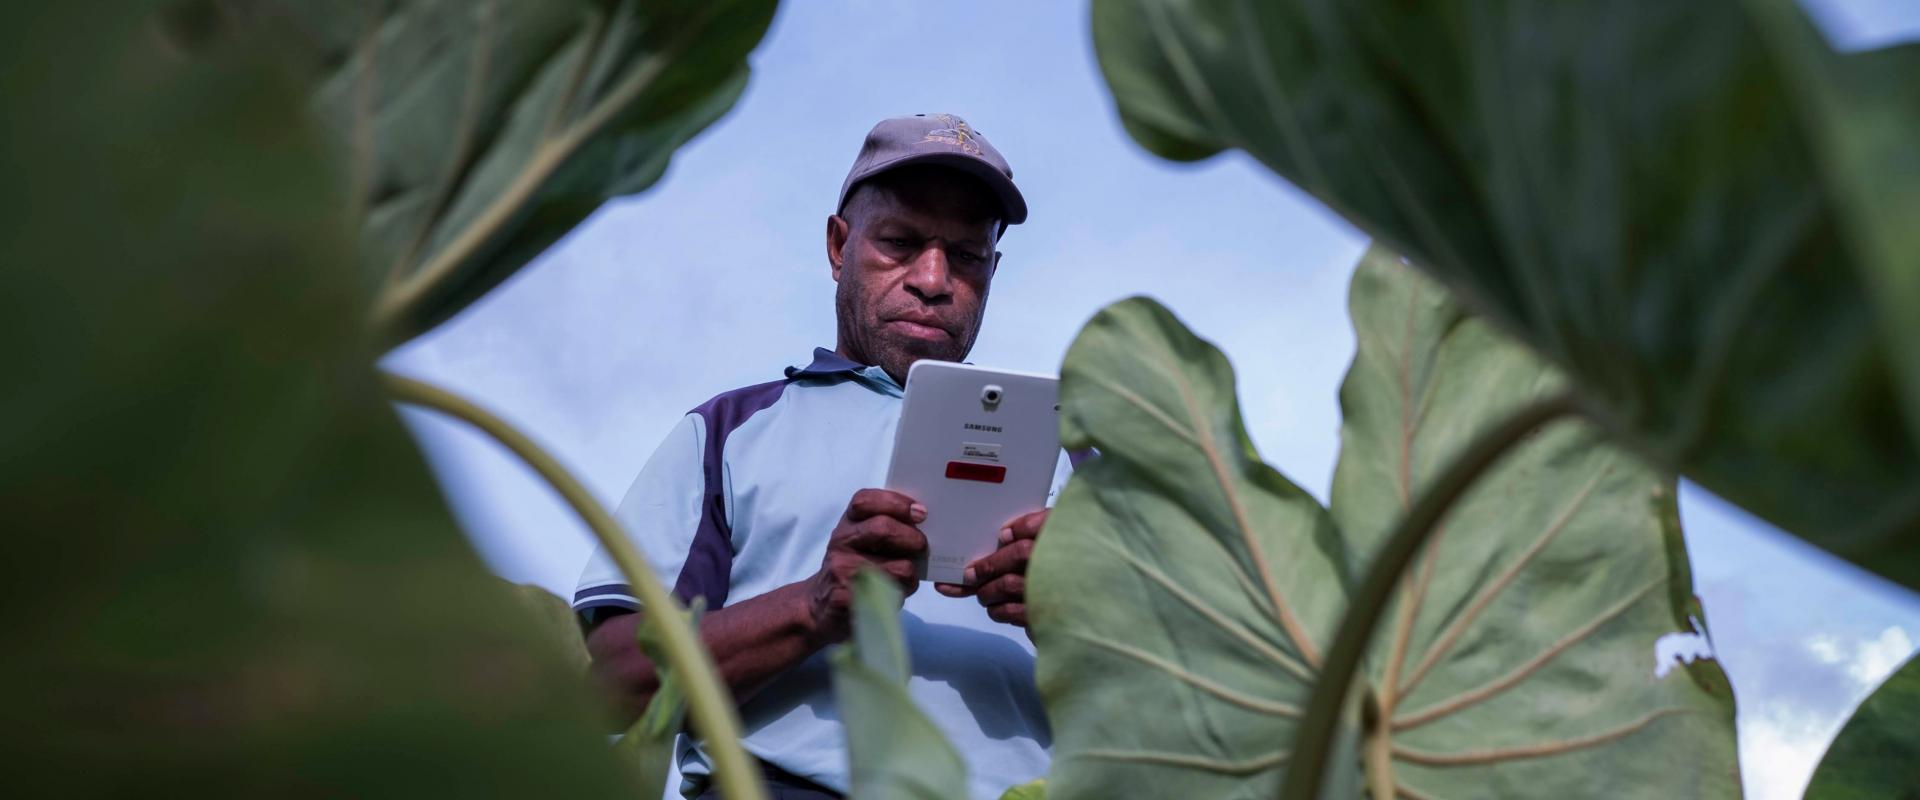 Johnny Wemin from the FPDA sweet potato project practices using tablets during a Commcare training delivered by AgImpact at the NARI research station in Leh, in Eastern Highlands Province of Papua New Guinea